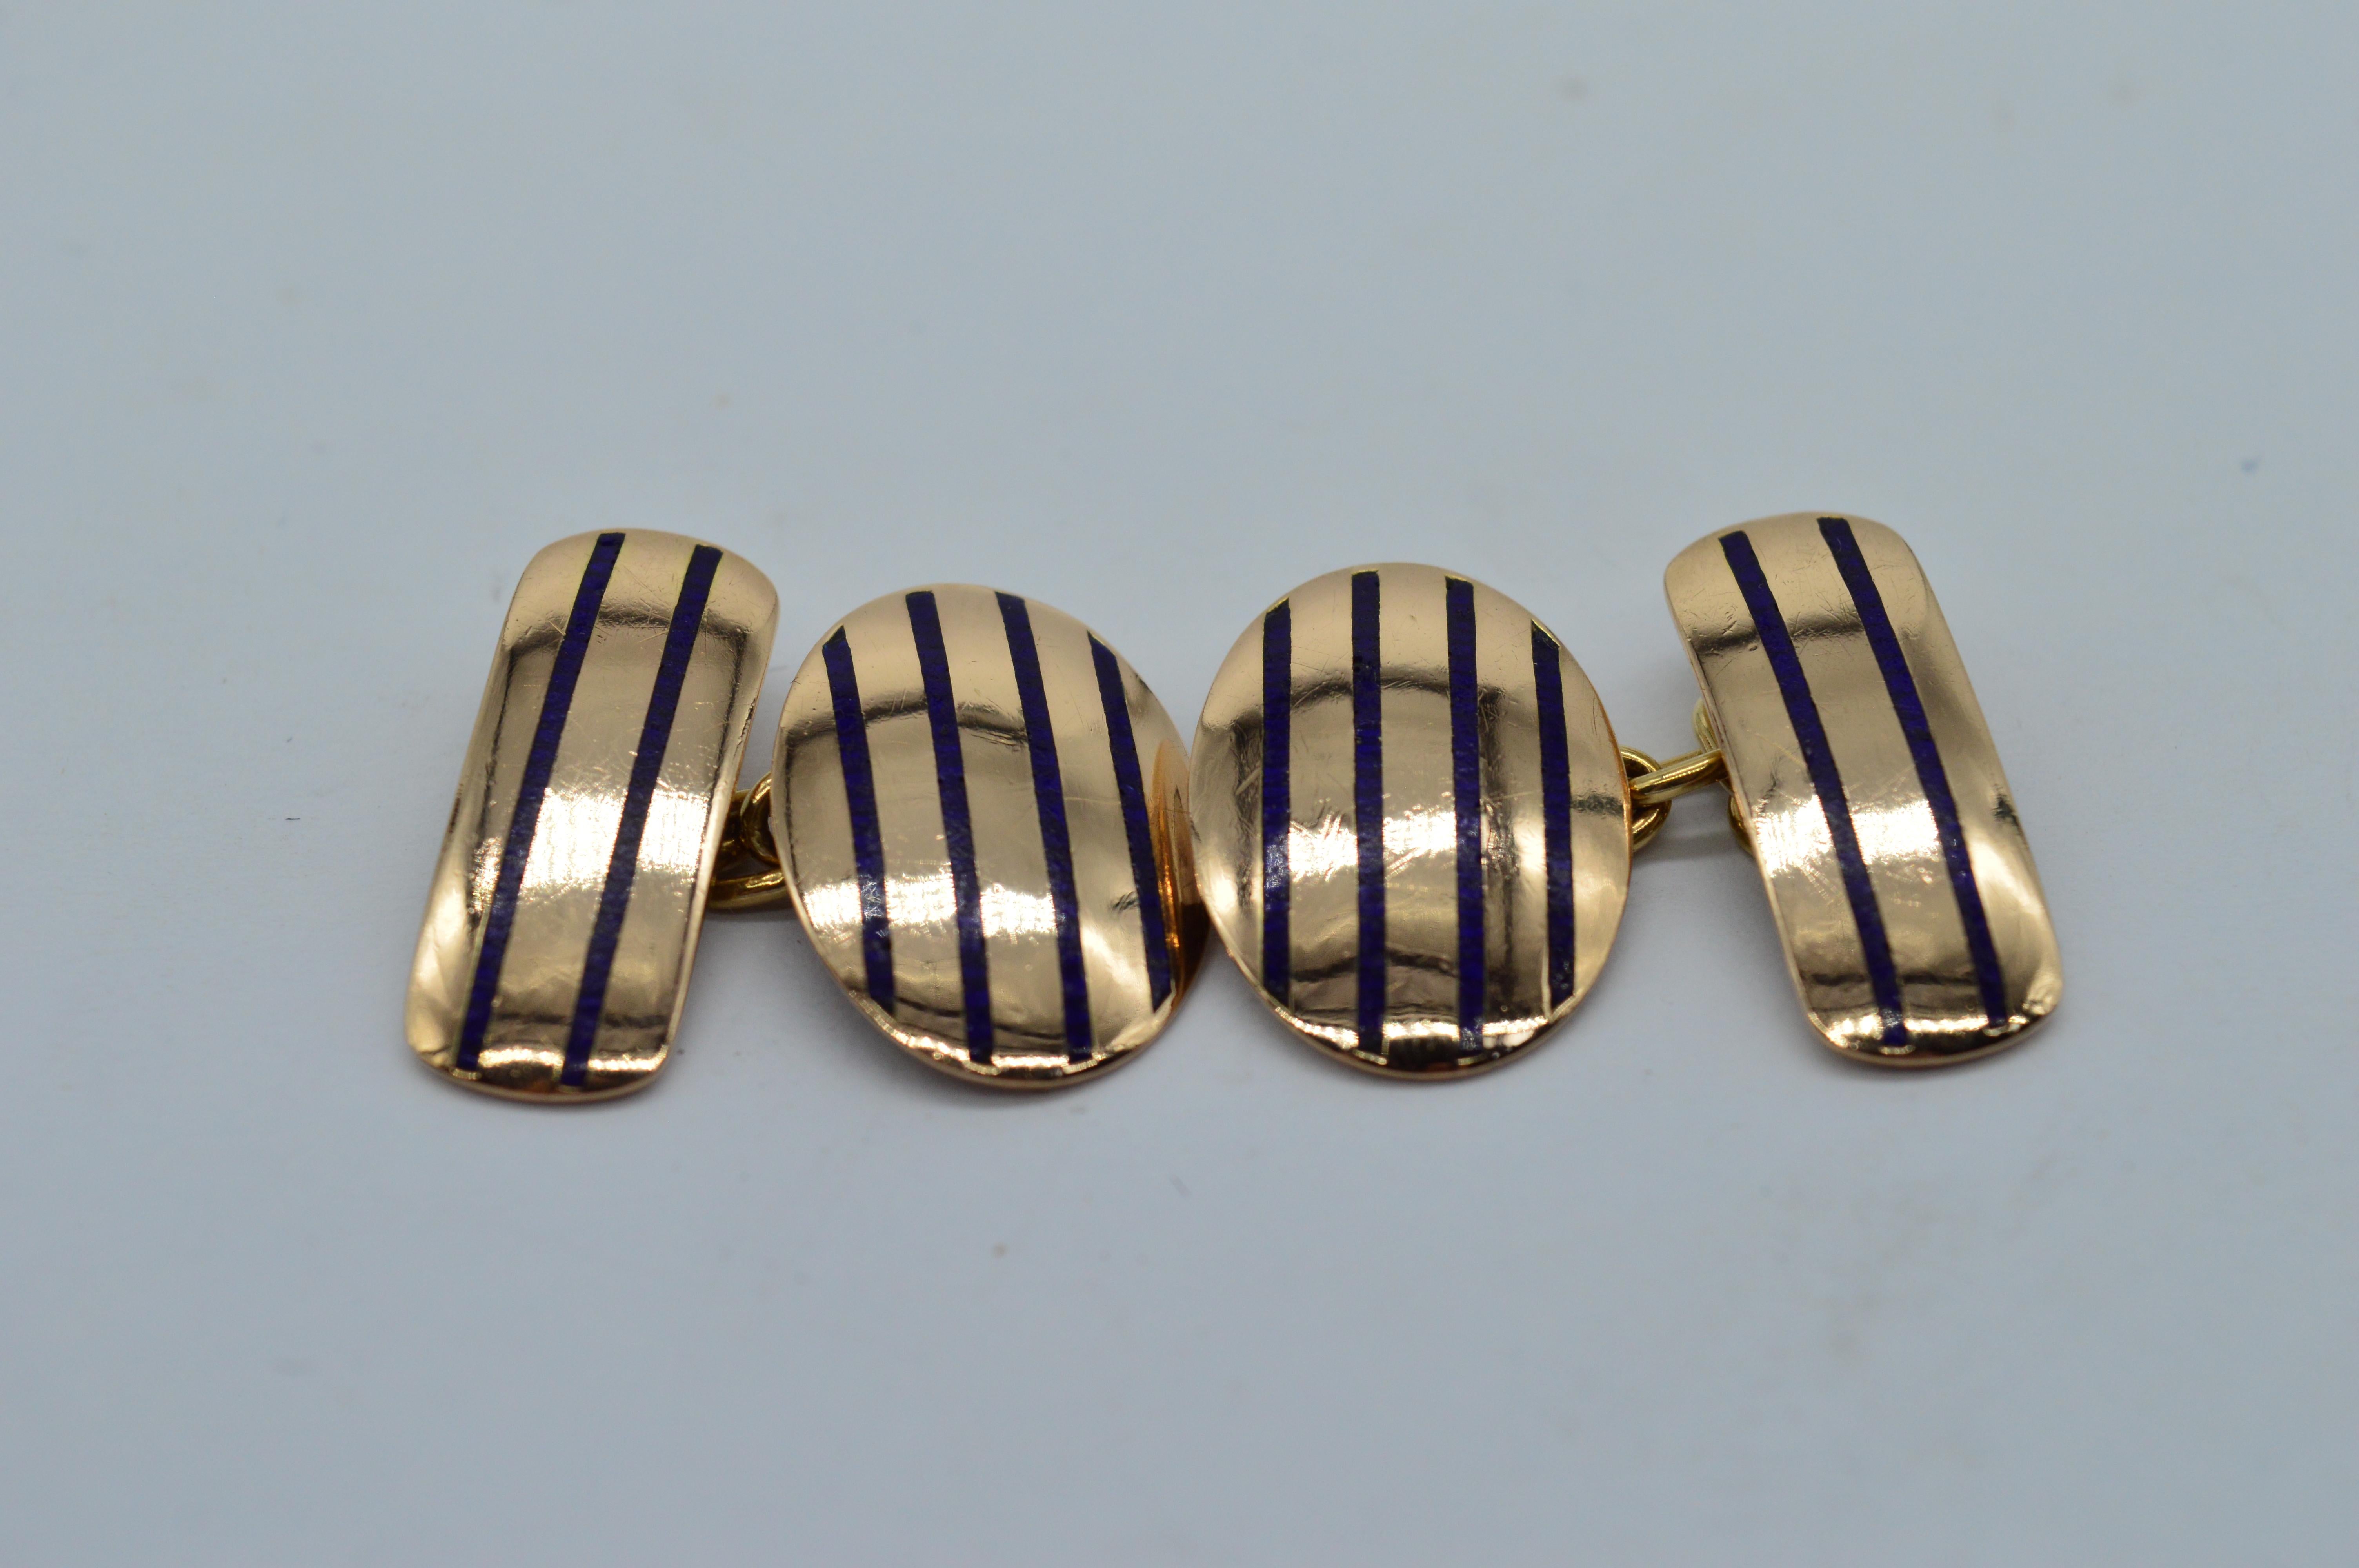 A set of 9ct Rose gold cufflinks made by Deakin and Francis

Featuring a striped blue enamel design

7.24g

We have sold to the set of Hit shows like Peaky Blinders and Outlander as well as to Buckingham Palace so our items are truly fit for